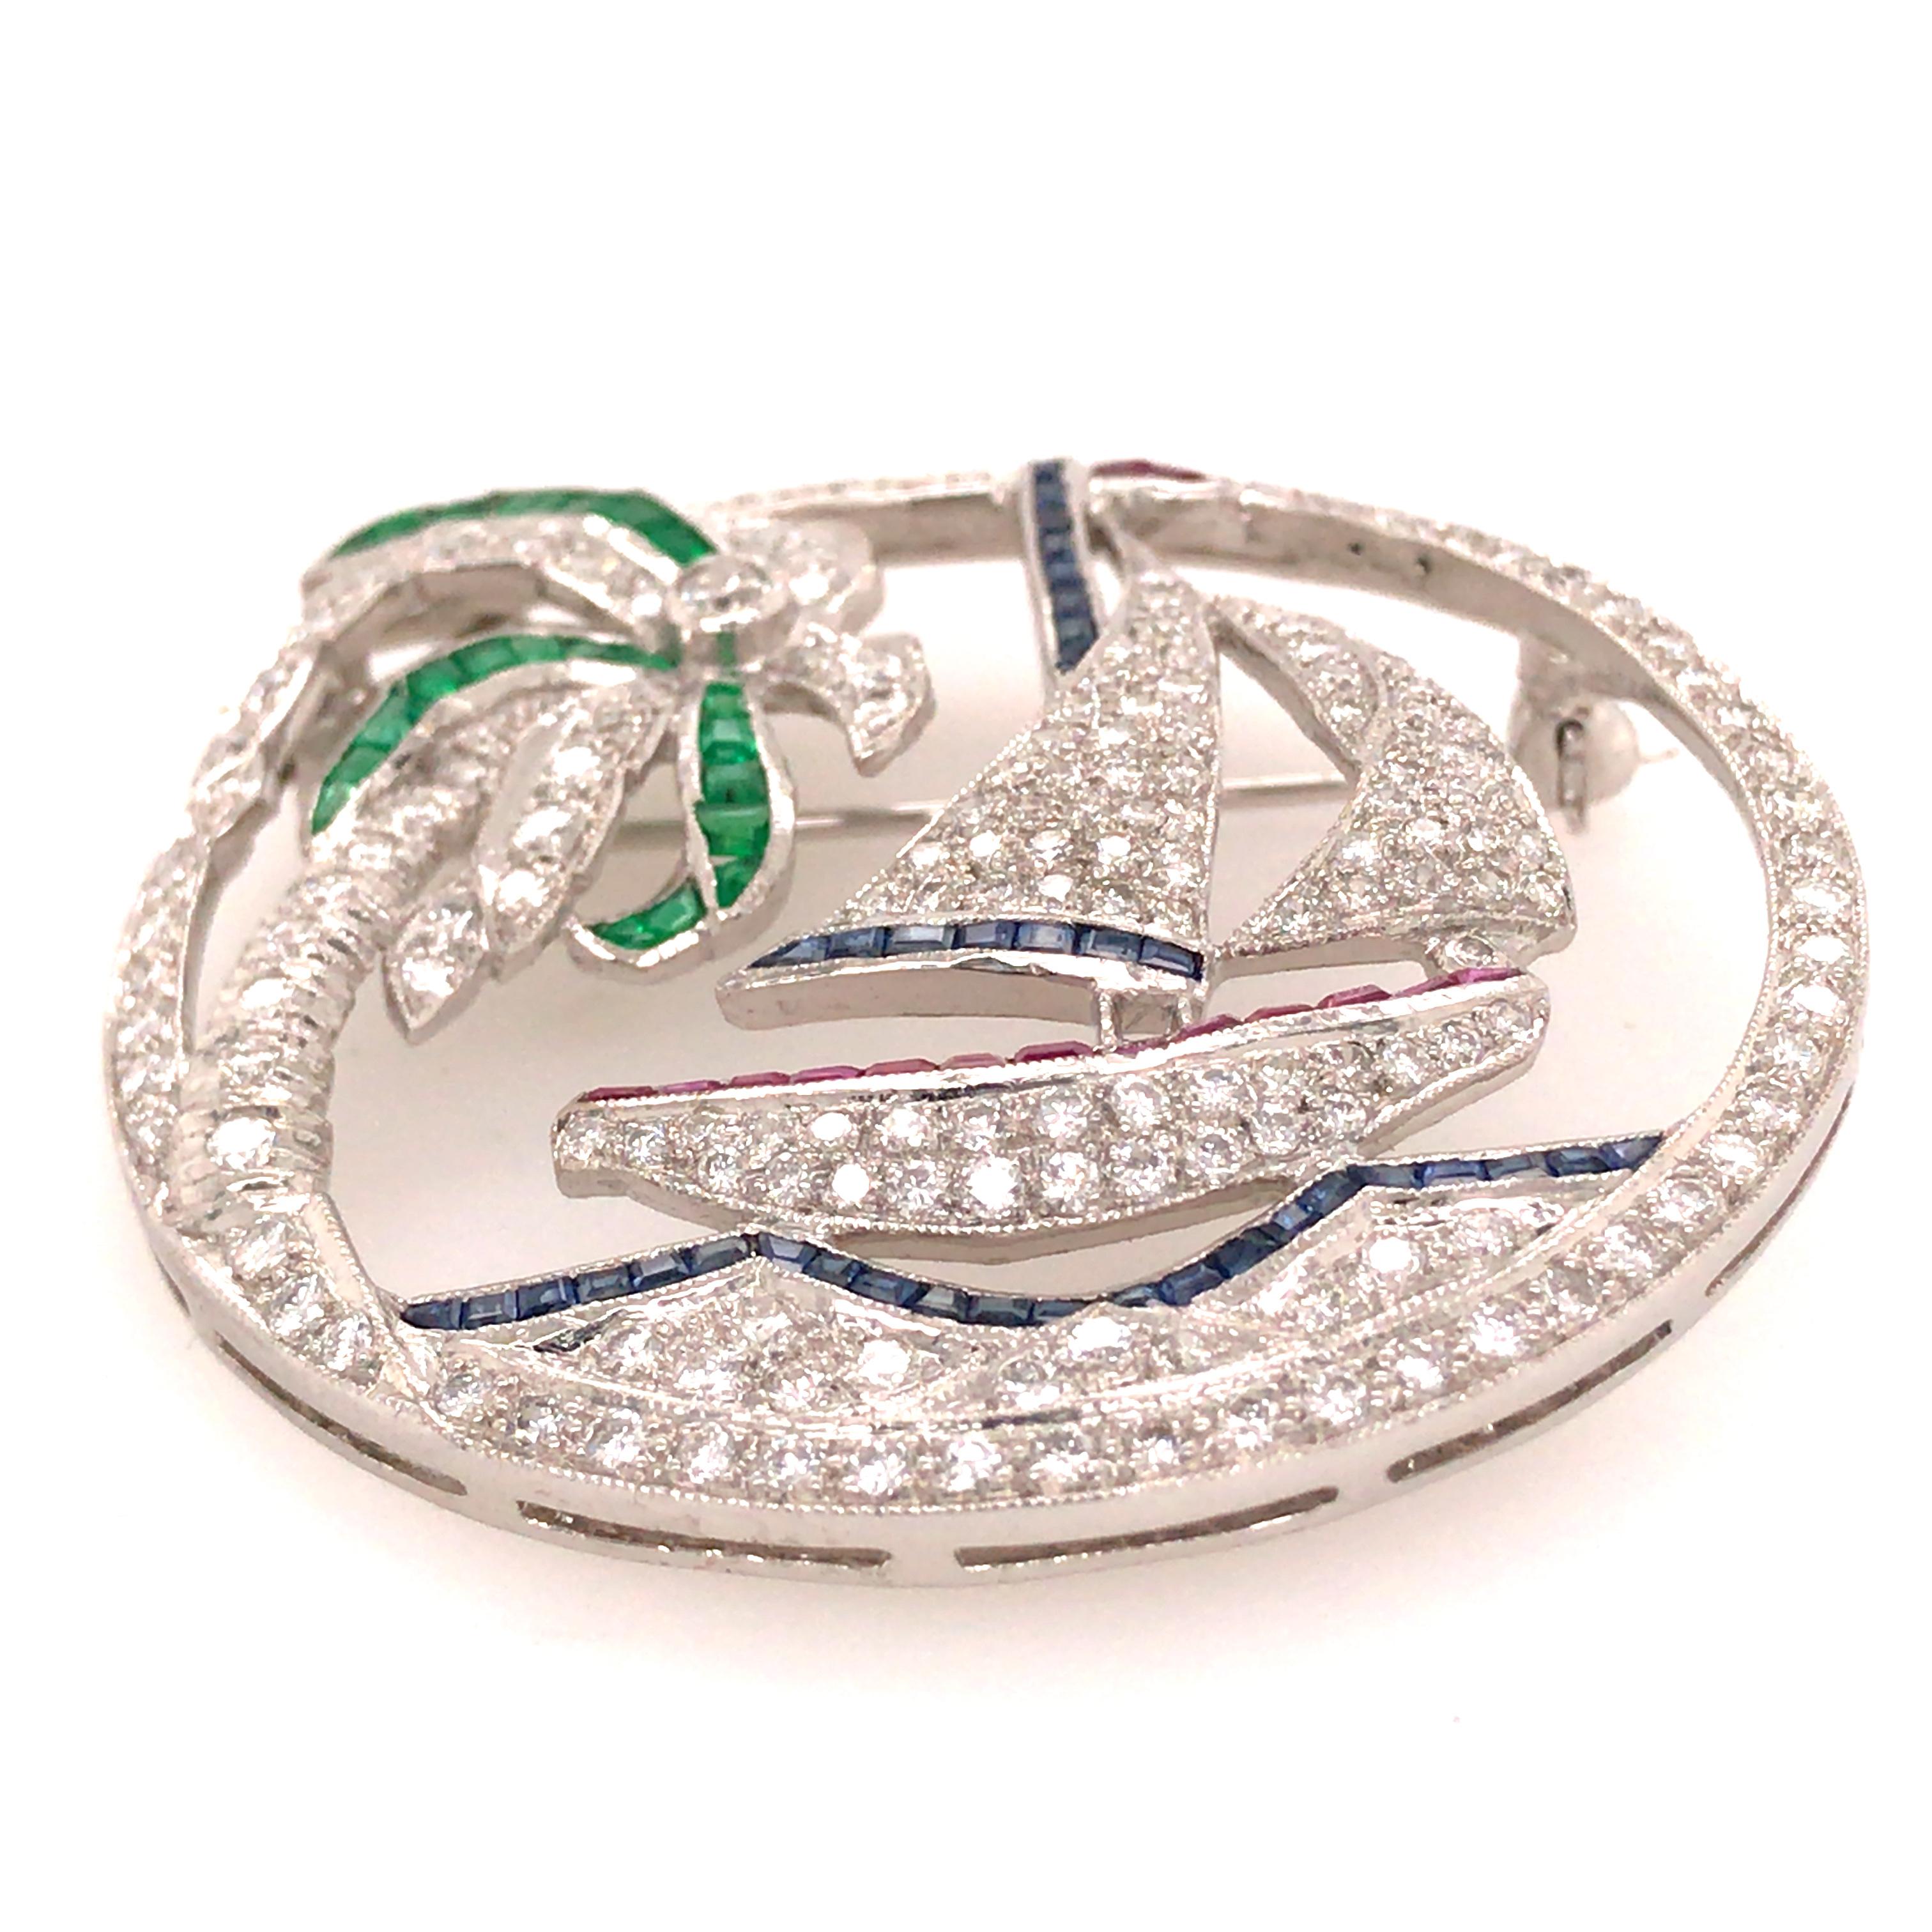 Diamond, Ruby, Sapphire and Emerald Sailboat Pin in 18K White Gold.   Round Brilliant Cut Diamonds weighing 2.2ctw, G-H in color and VS in clarity, (15) Ruby Gemstones weighing .12ct, (40) Sapphire Gemstones weighing .24ct and (24) Emerald Gemstones